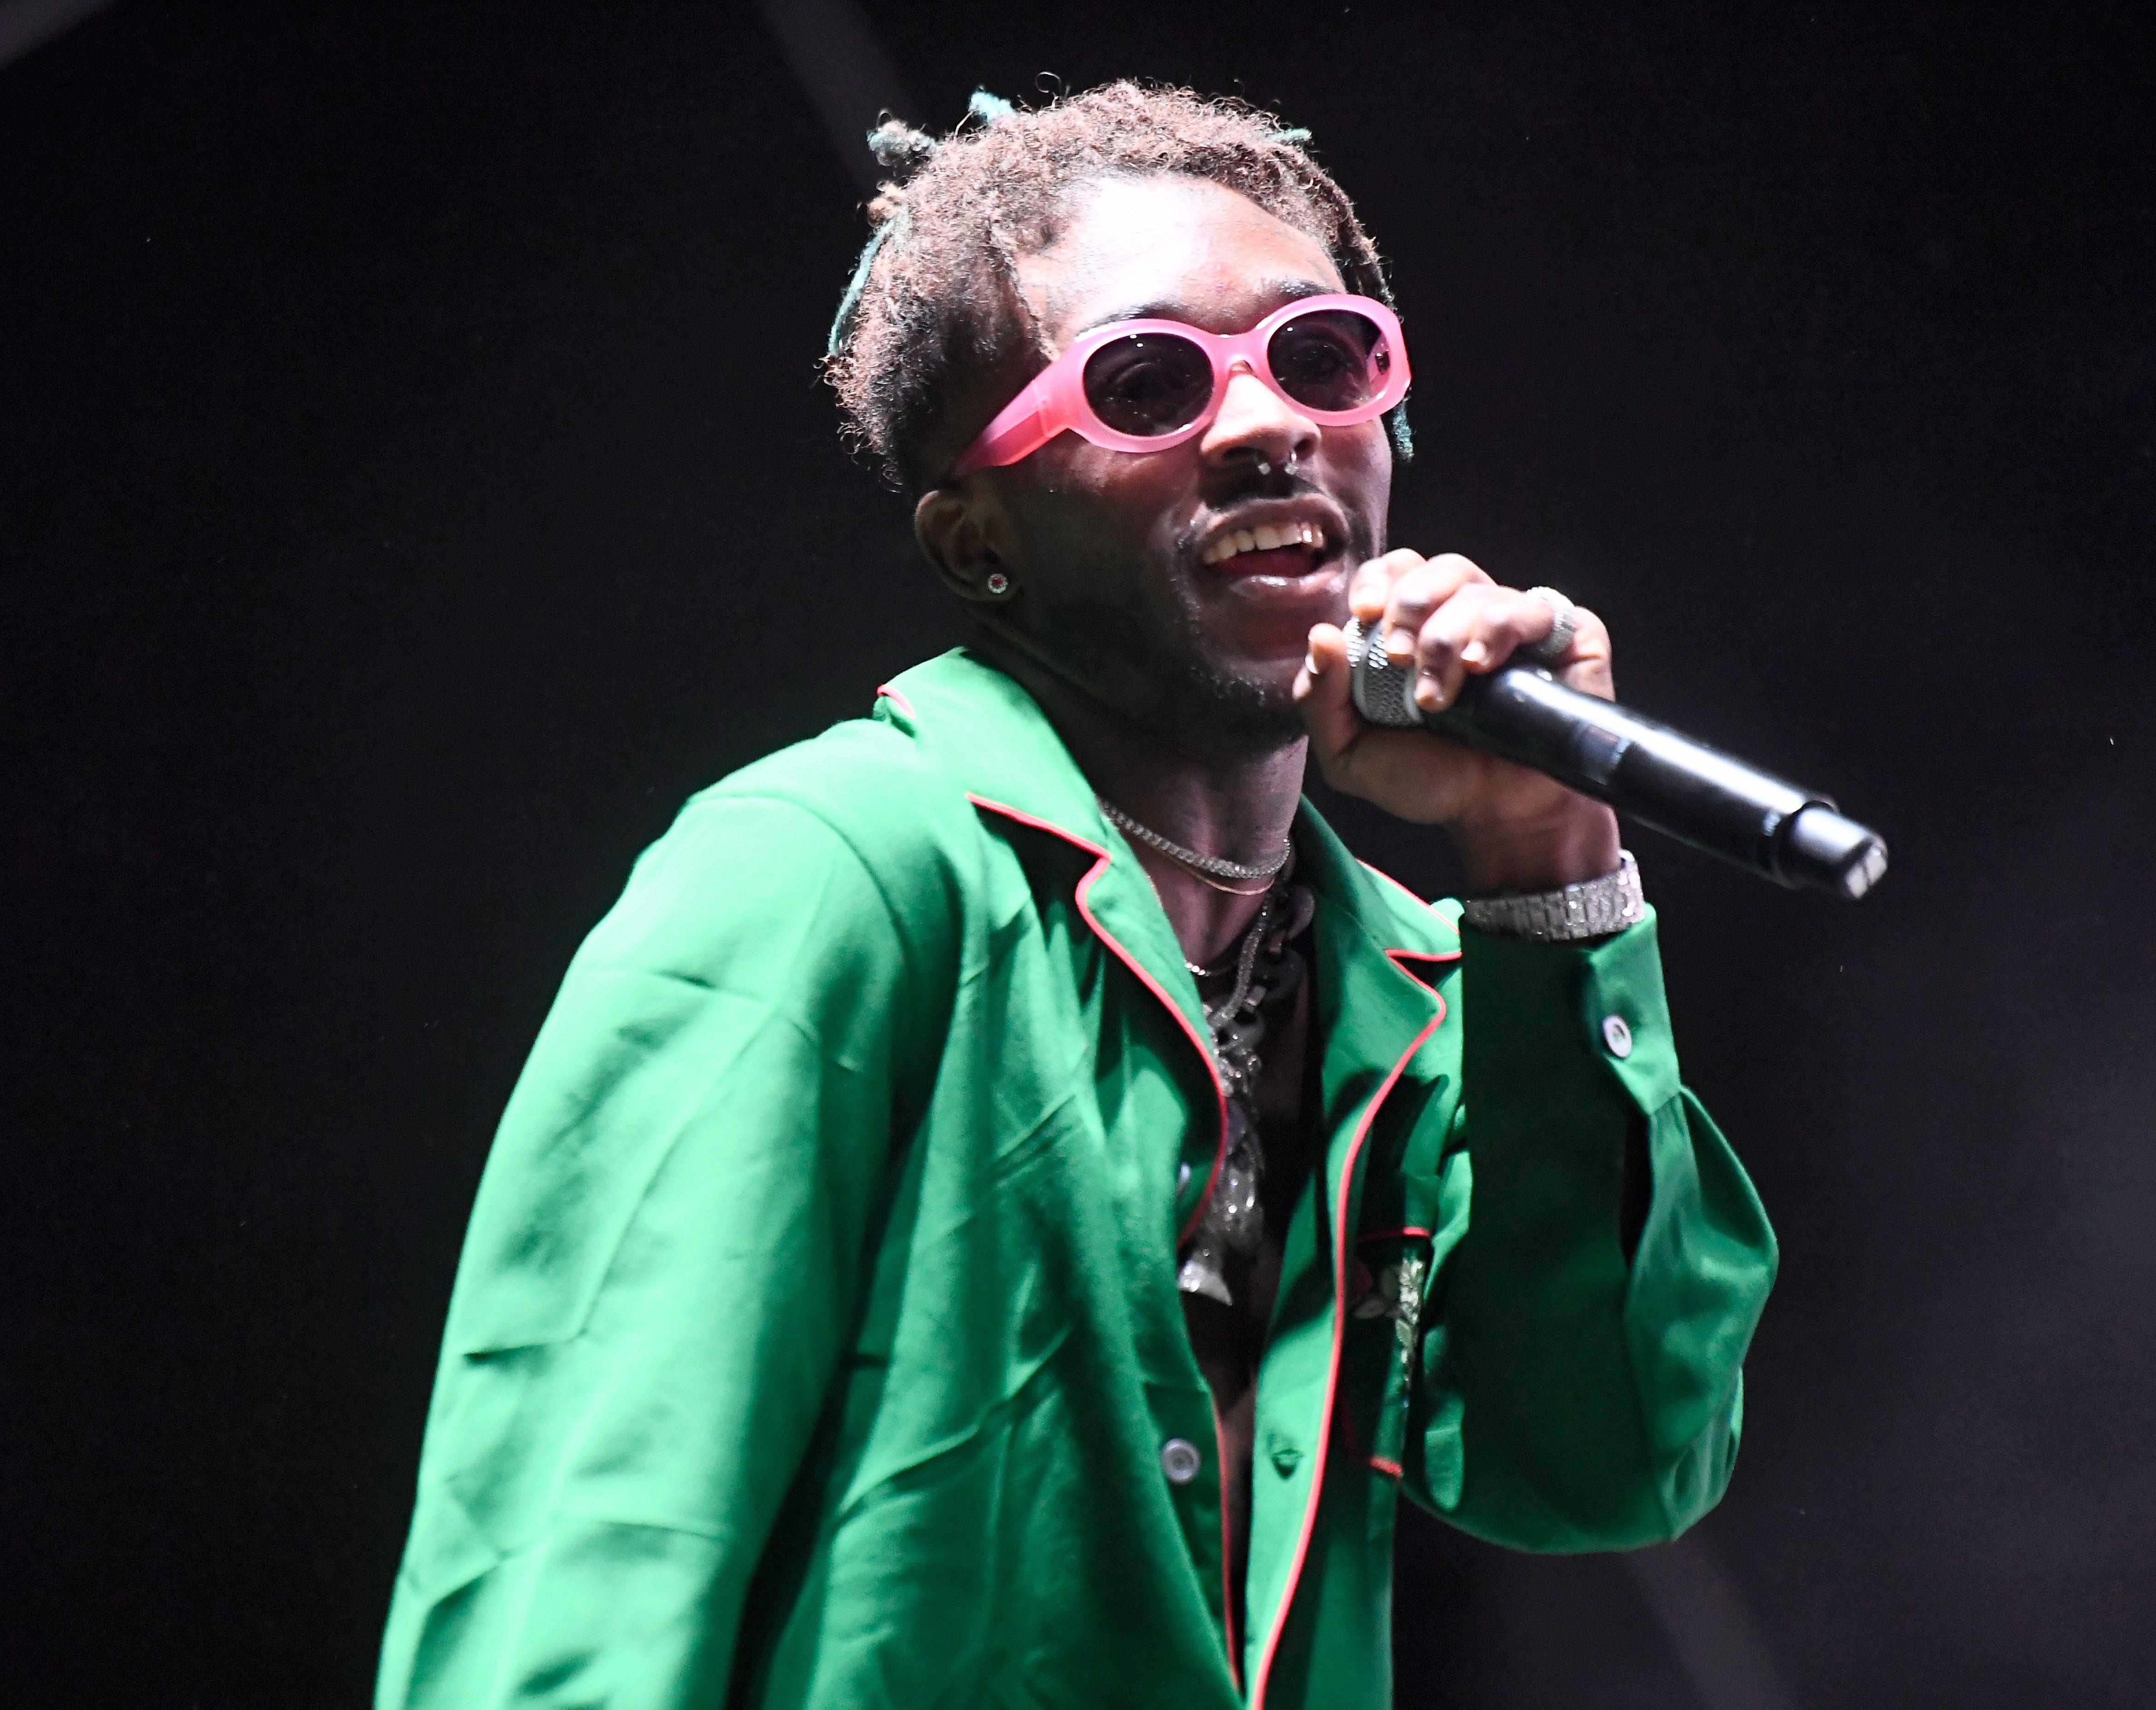 Lil Uzi Vert Arrested After Dirtbike Chase With Cops